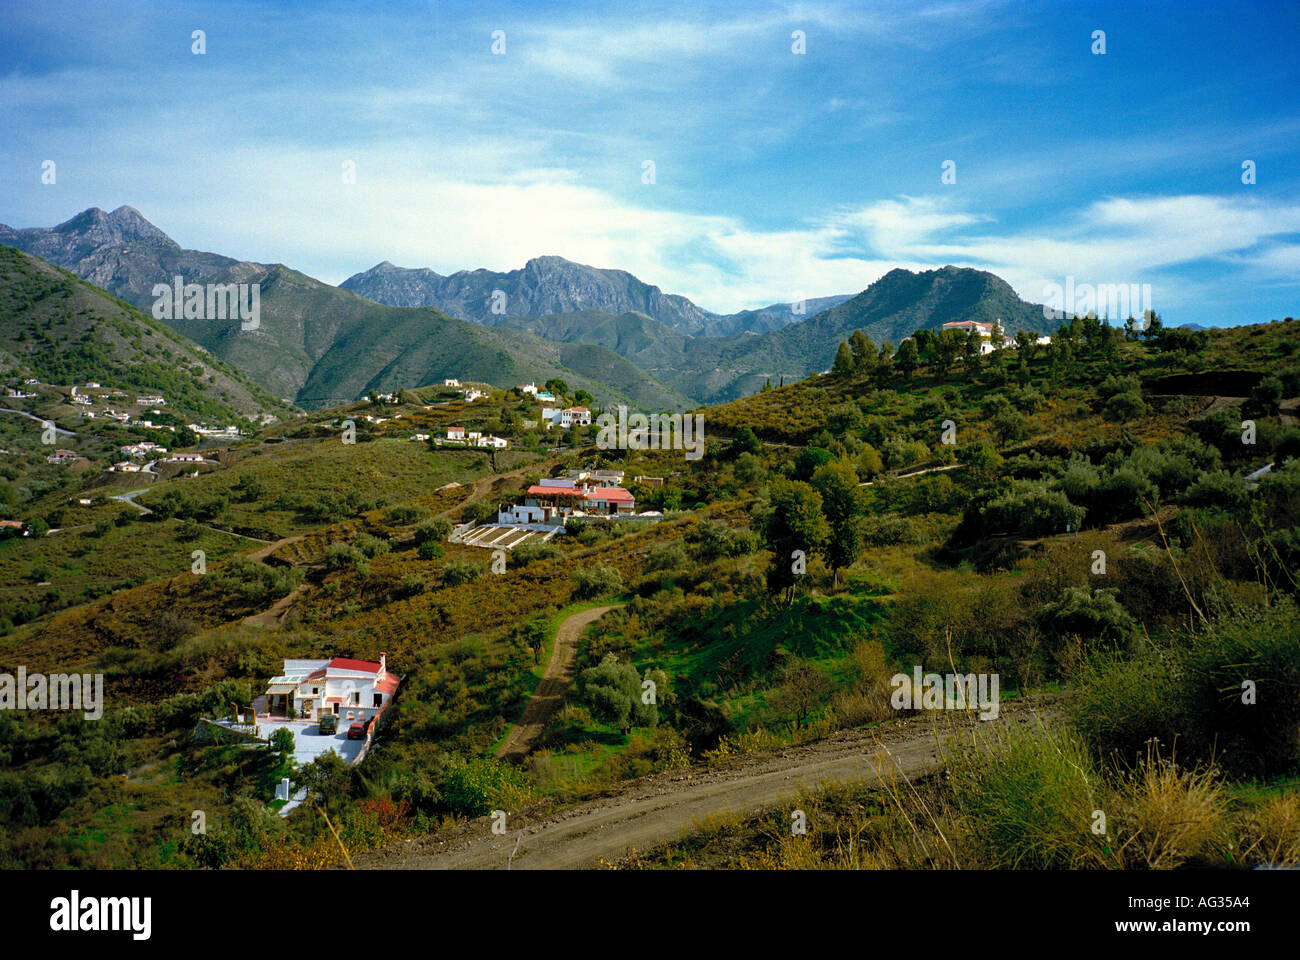 A country view in the foothills of the Sierra Almijara on the road to Competa near Nerja, Andalucia, Spain Stock Photo